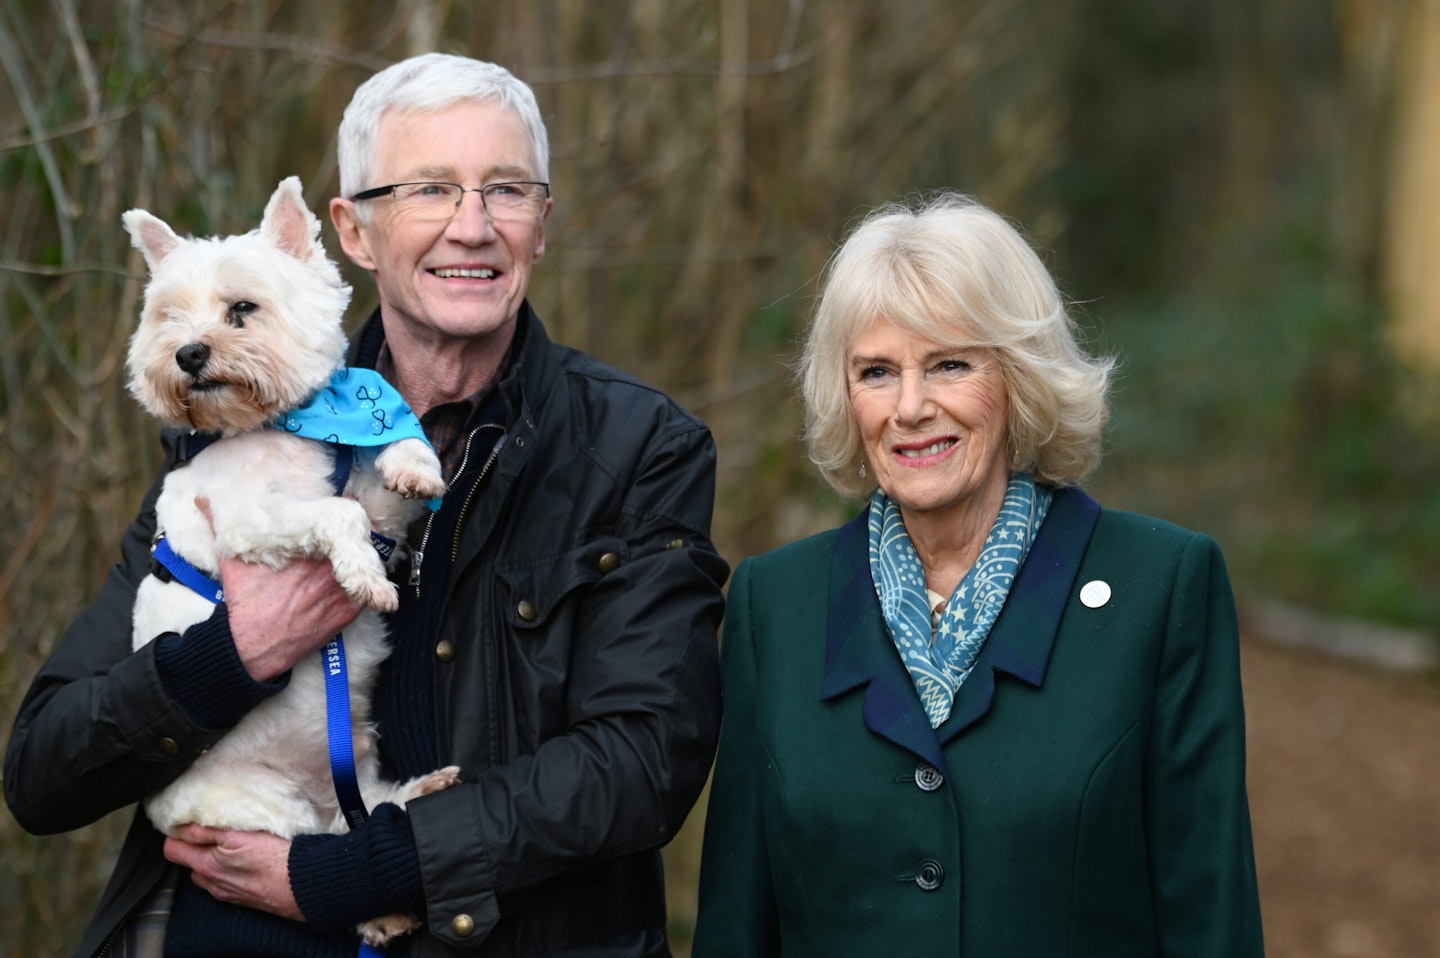 Paul O'Grady with the Queen Consort Camilla